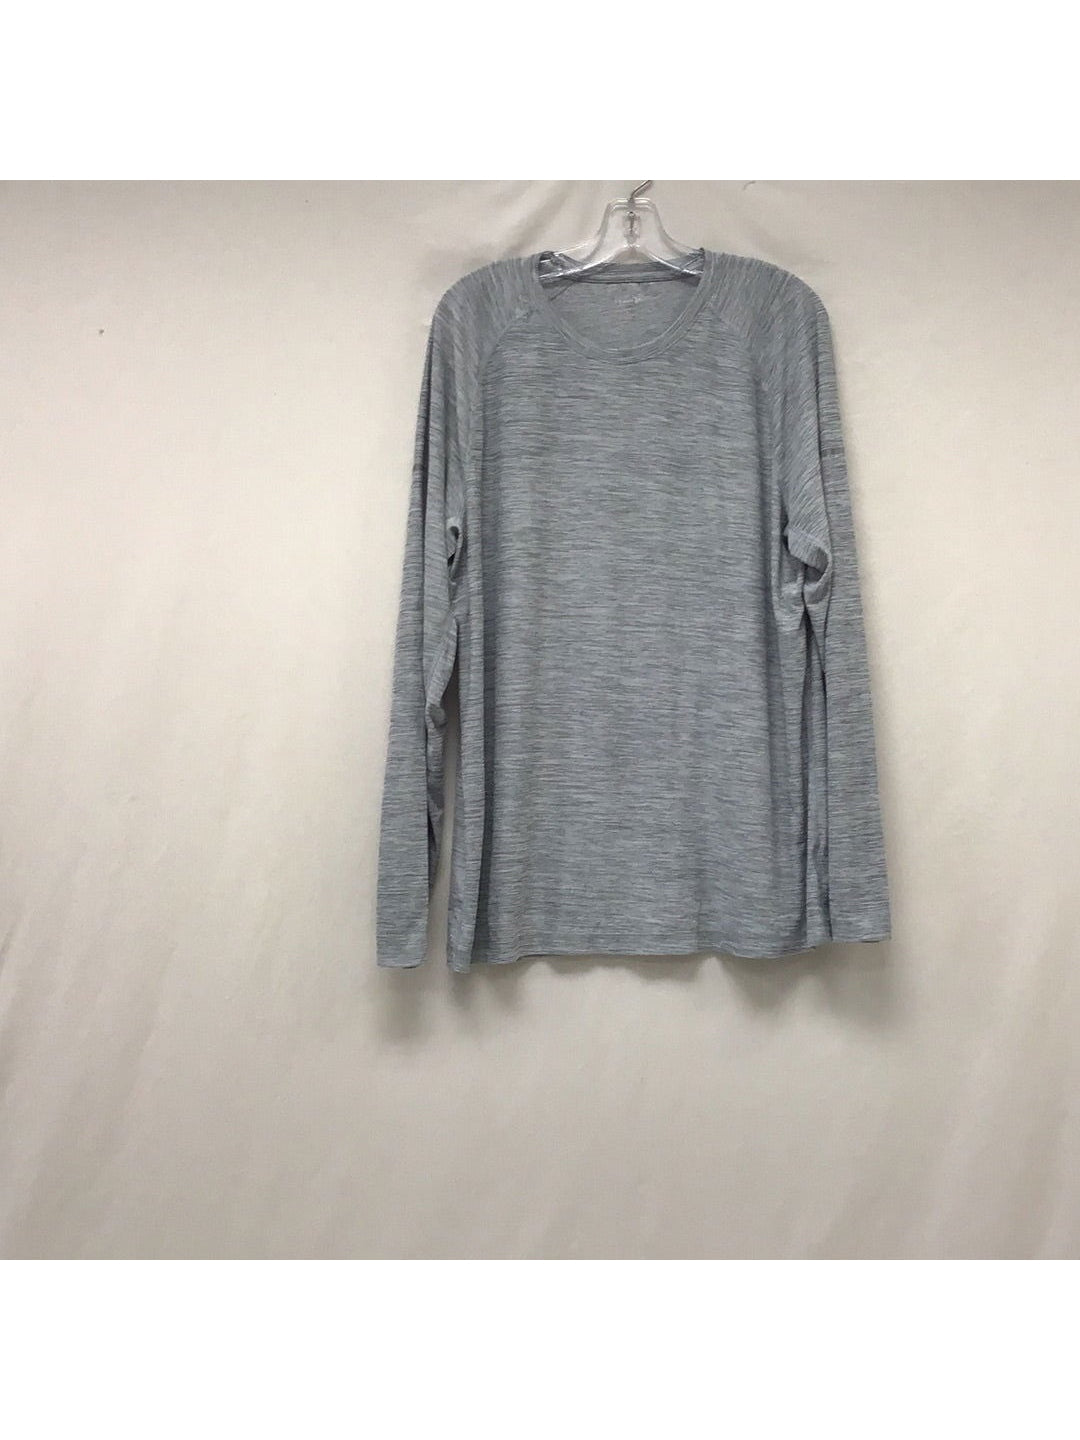 Old Navy Active Men Gray Long Sleeve Shirt Size Extra Large - The Kennedy Collective Thrift - 